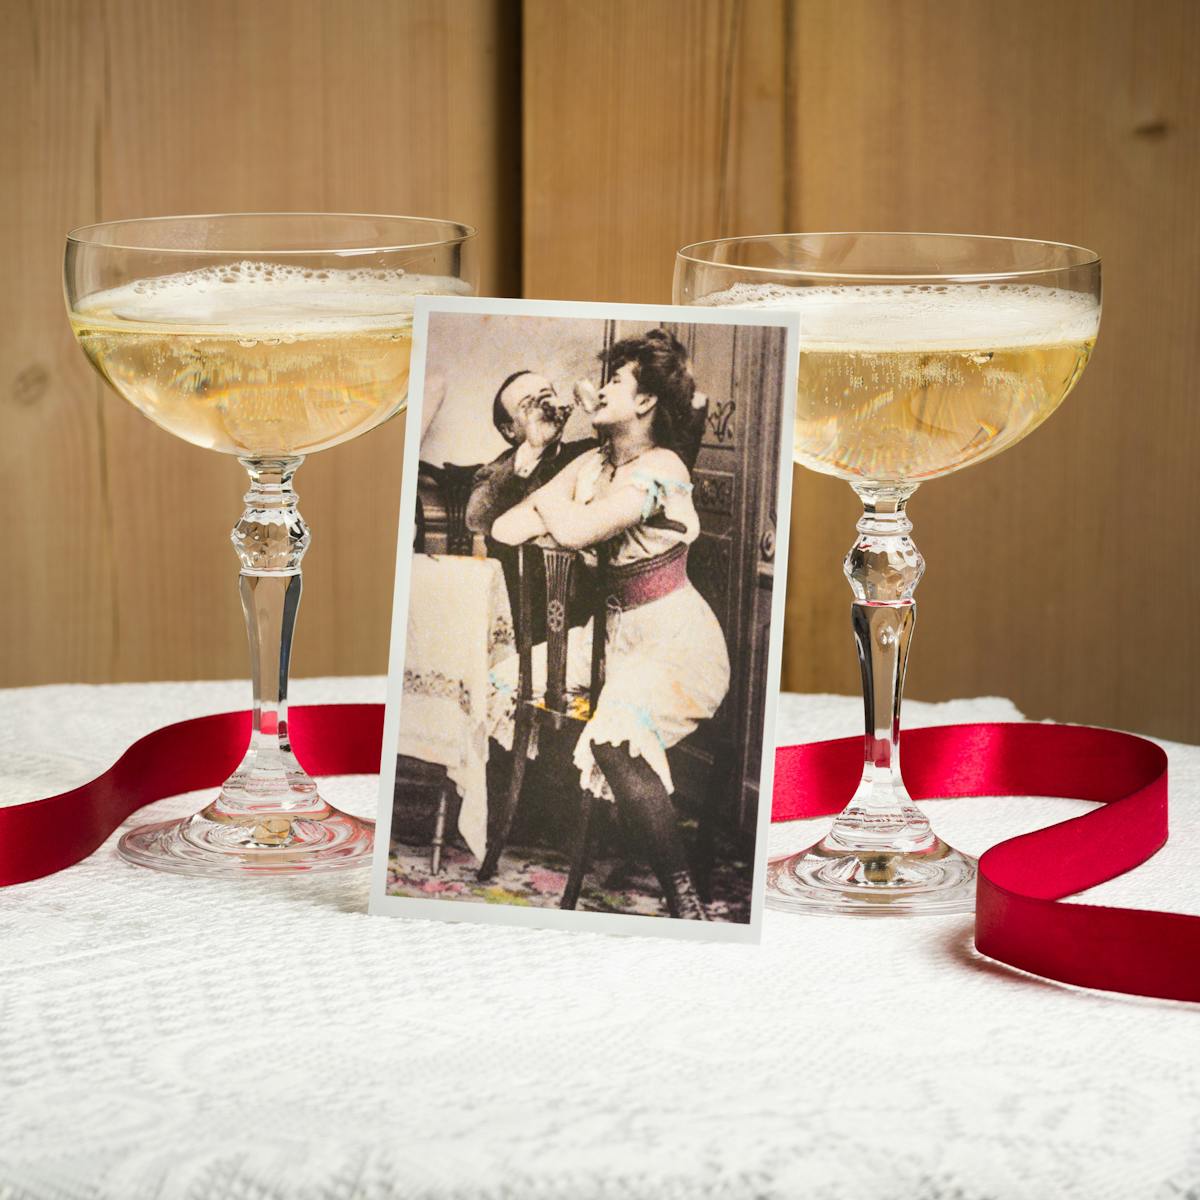 Colour photograph of a round table top covered in a white lace table cloth against a wooden panelled wall. On the table are two champagne coupes filled with sparkling champagne. Propped up against one of the glasses is a old hand tinted photographic print. The print is from the turn of the 20th century and show a woman in under garments sitting on a dining chair backwards, legs astride the backrest. Behind her a man is seated pouring a drink from a champagne glass into her mouth. A red ribbon snakes on its side around the bases of the glasses and the photographic print and off the side of the table.